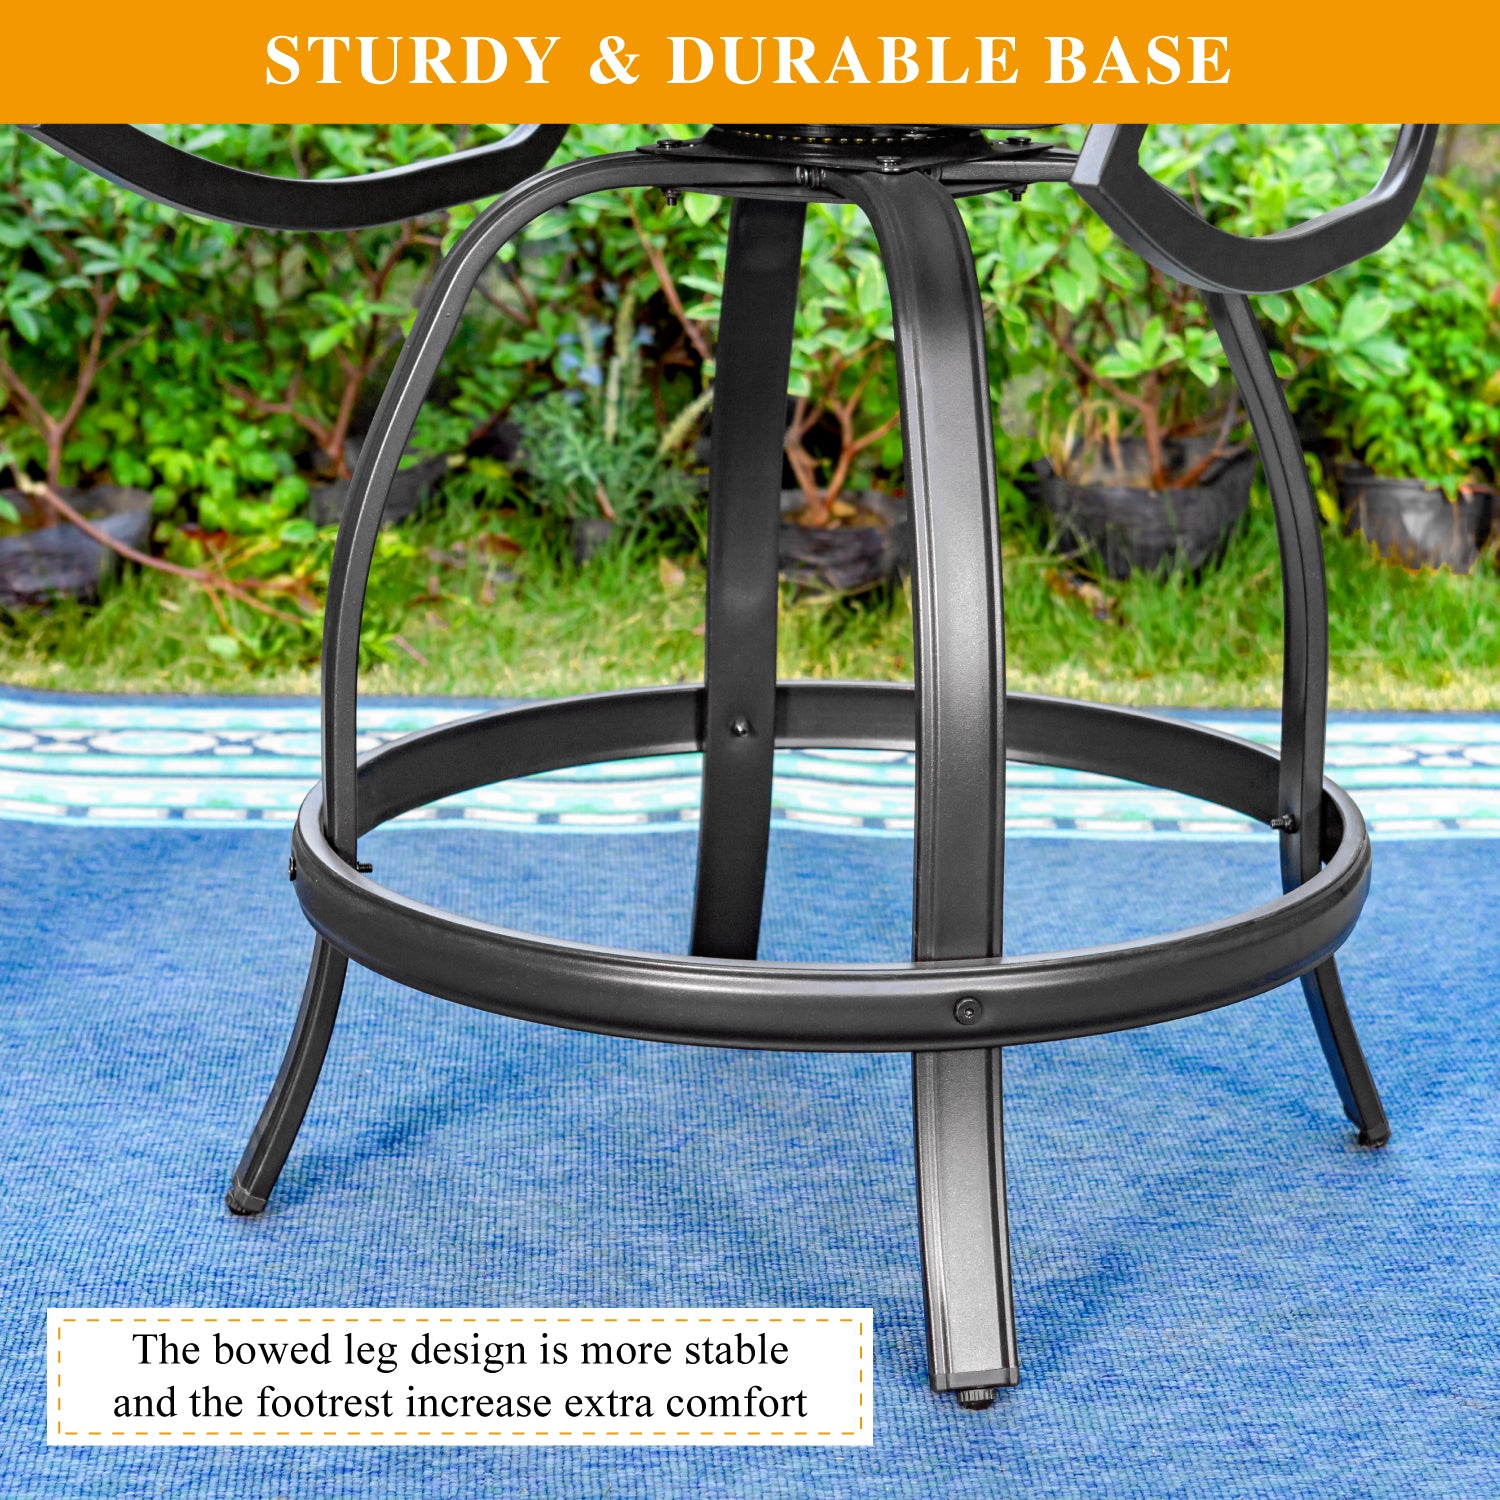 Sophia & William Outdoor Bar Stool Sets Swivel Textilene Bar Stools with Reinforced Base & Geometrically-stamped High Bar Table